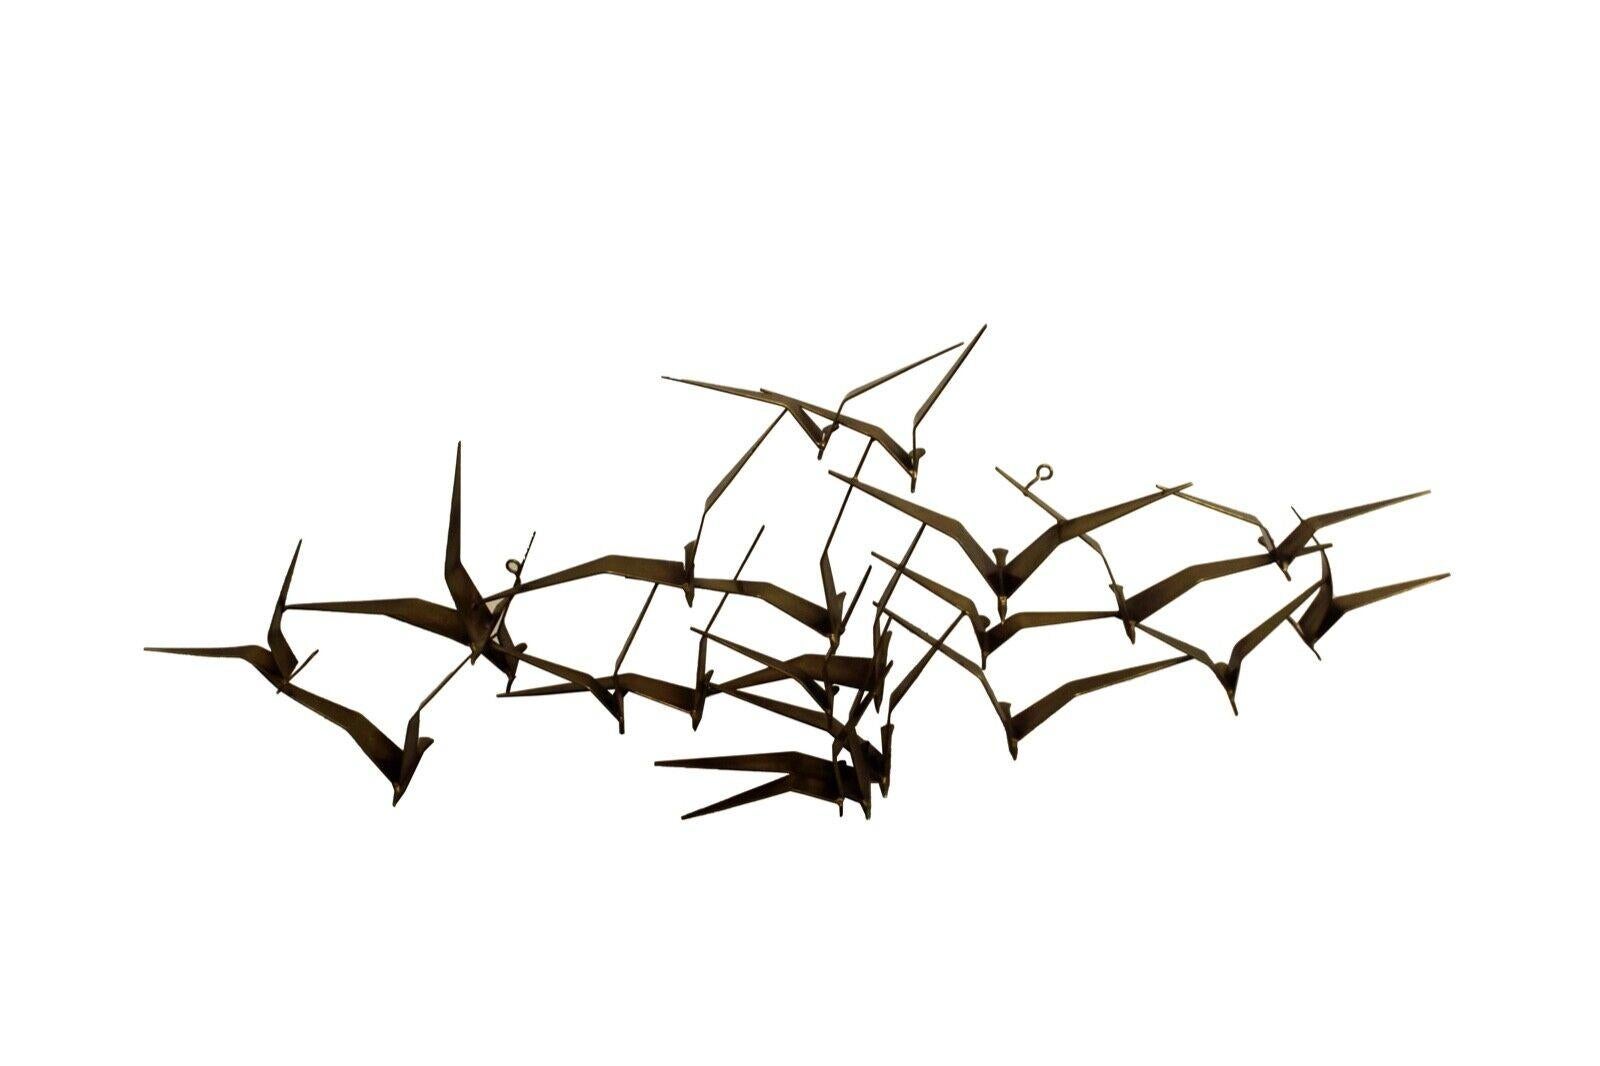 This is a beautiful and original signed C. Jere 'Birds in Flight' metal Brutalist wall sculpture dated 1968. Made of solid brass with sculpted birds, this piece is an iconic and Classic Mid-Century design. in excellent condition. Dimensions: 56